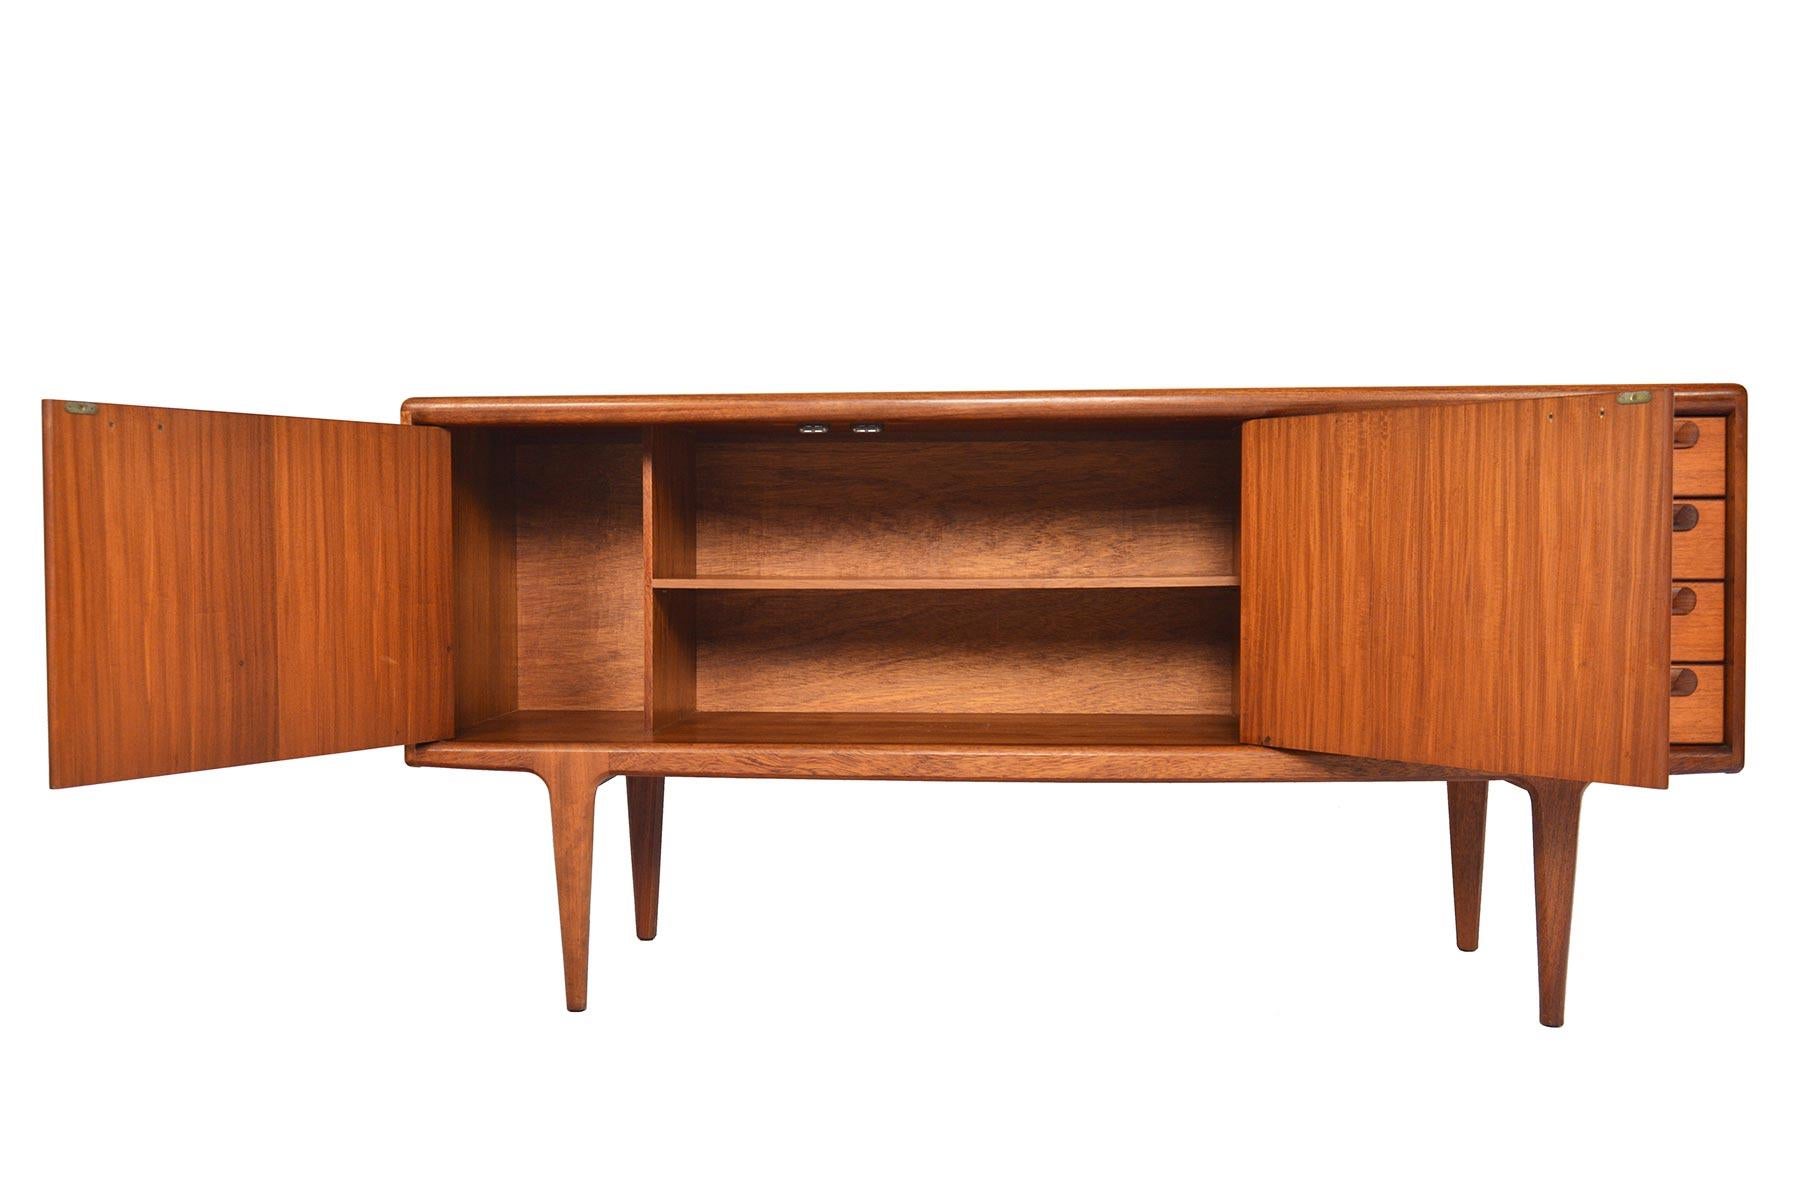 This small teak credenza was manufactured by Younger of England in the 1960s. Beautifully sculpted edge banding and handles add dynamic depth to this piece. The cabinet doors open to reveal a fixed vertical divider and an adjustable shelf. Four